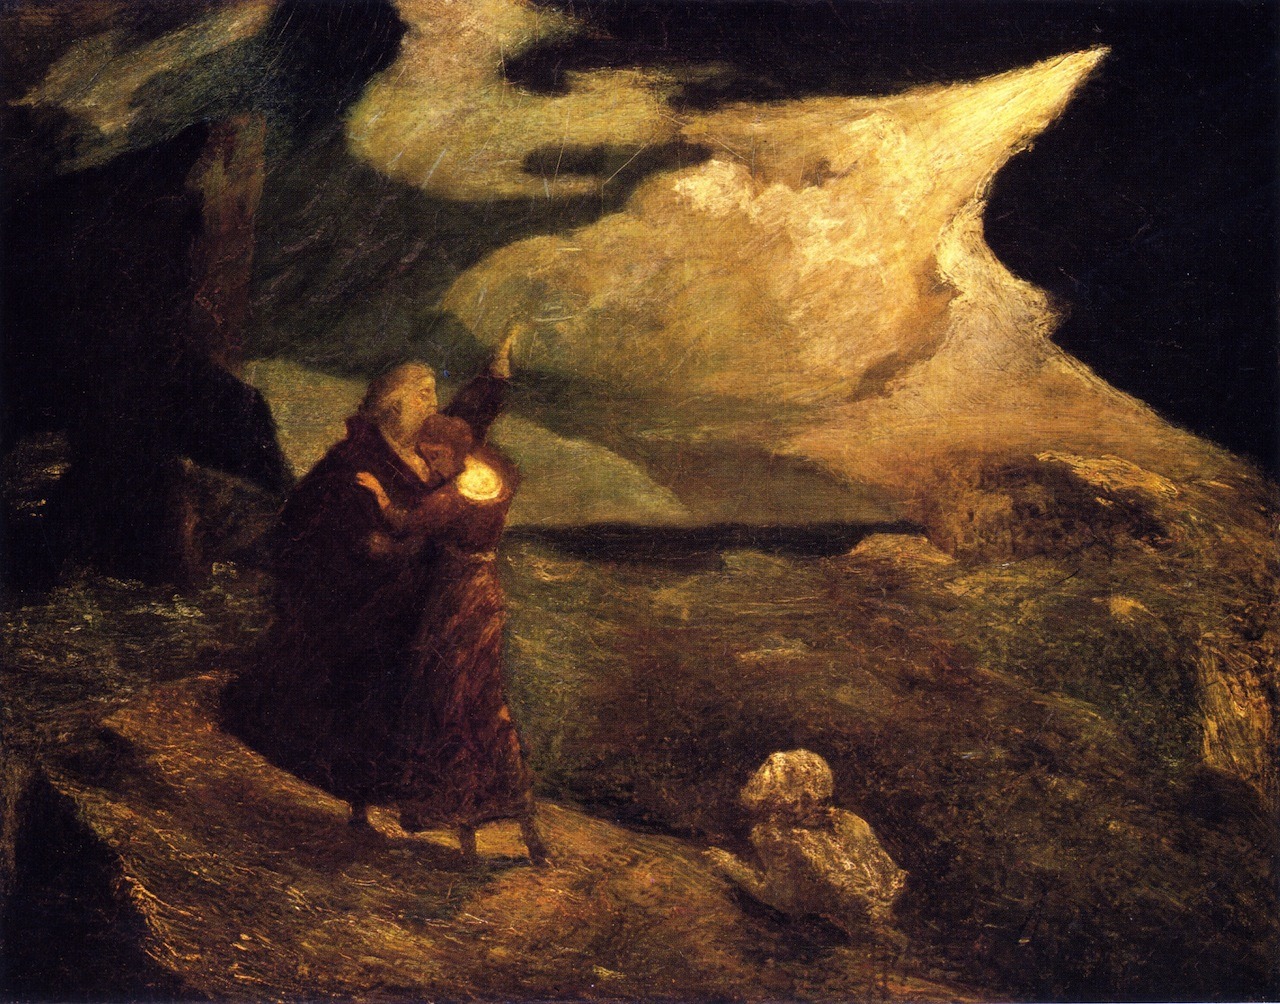 Albert Pinkham Ryder
[American Tonalist Painter, 1847-1917]
The Tempest
ca. 1982-1911
Oil on canvas
70.49 cm (27.75 in.) x 88.9 cm (35 in.)
Detroit Institute of the Arts, Midtown Detroit, Michigan, USA